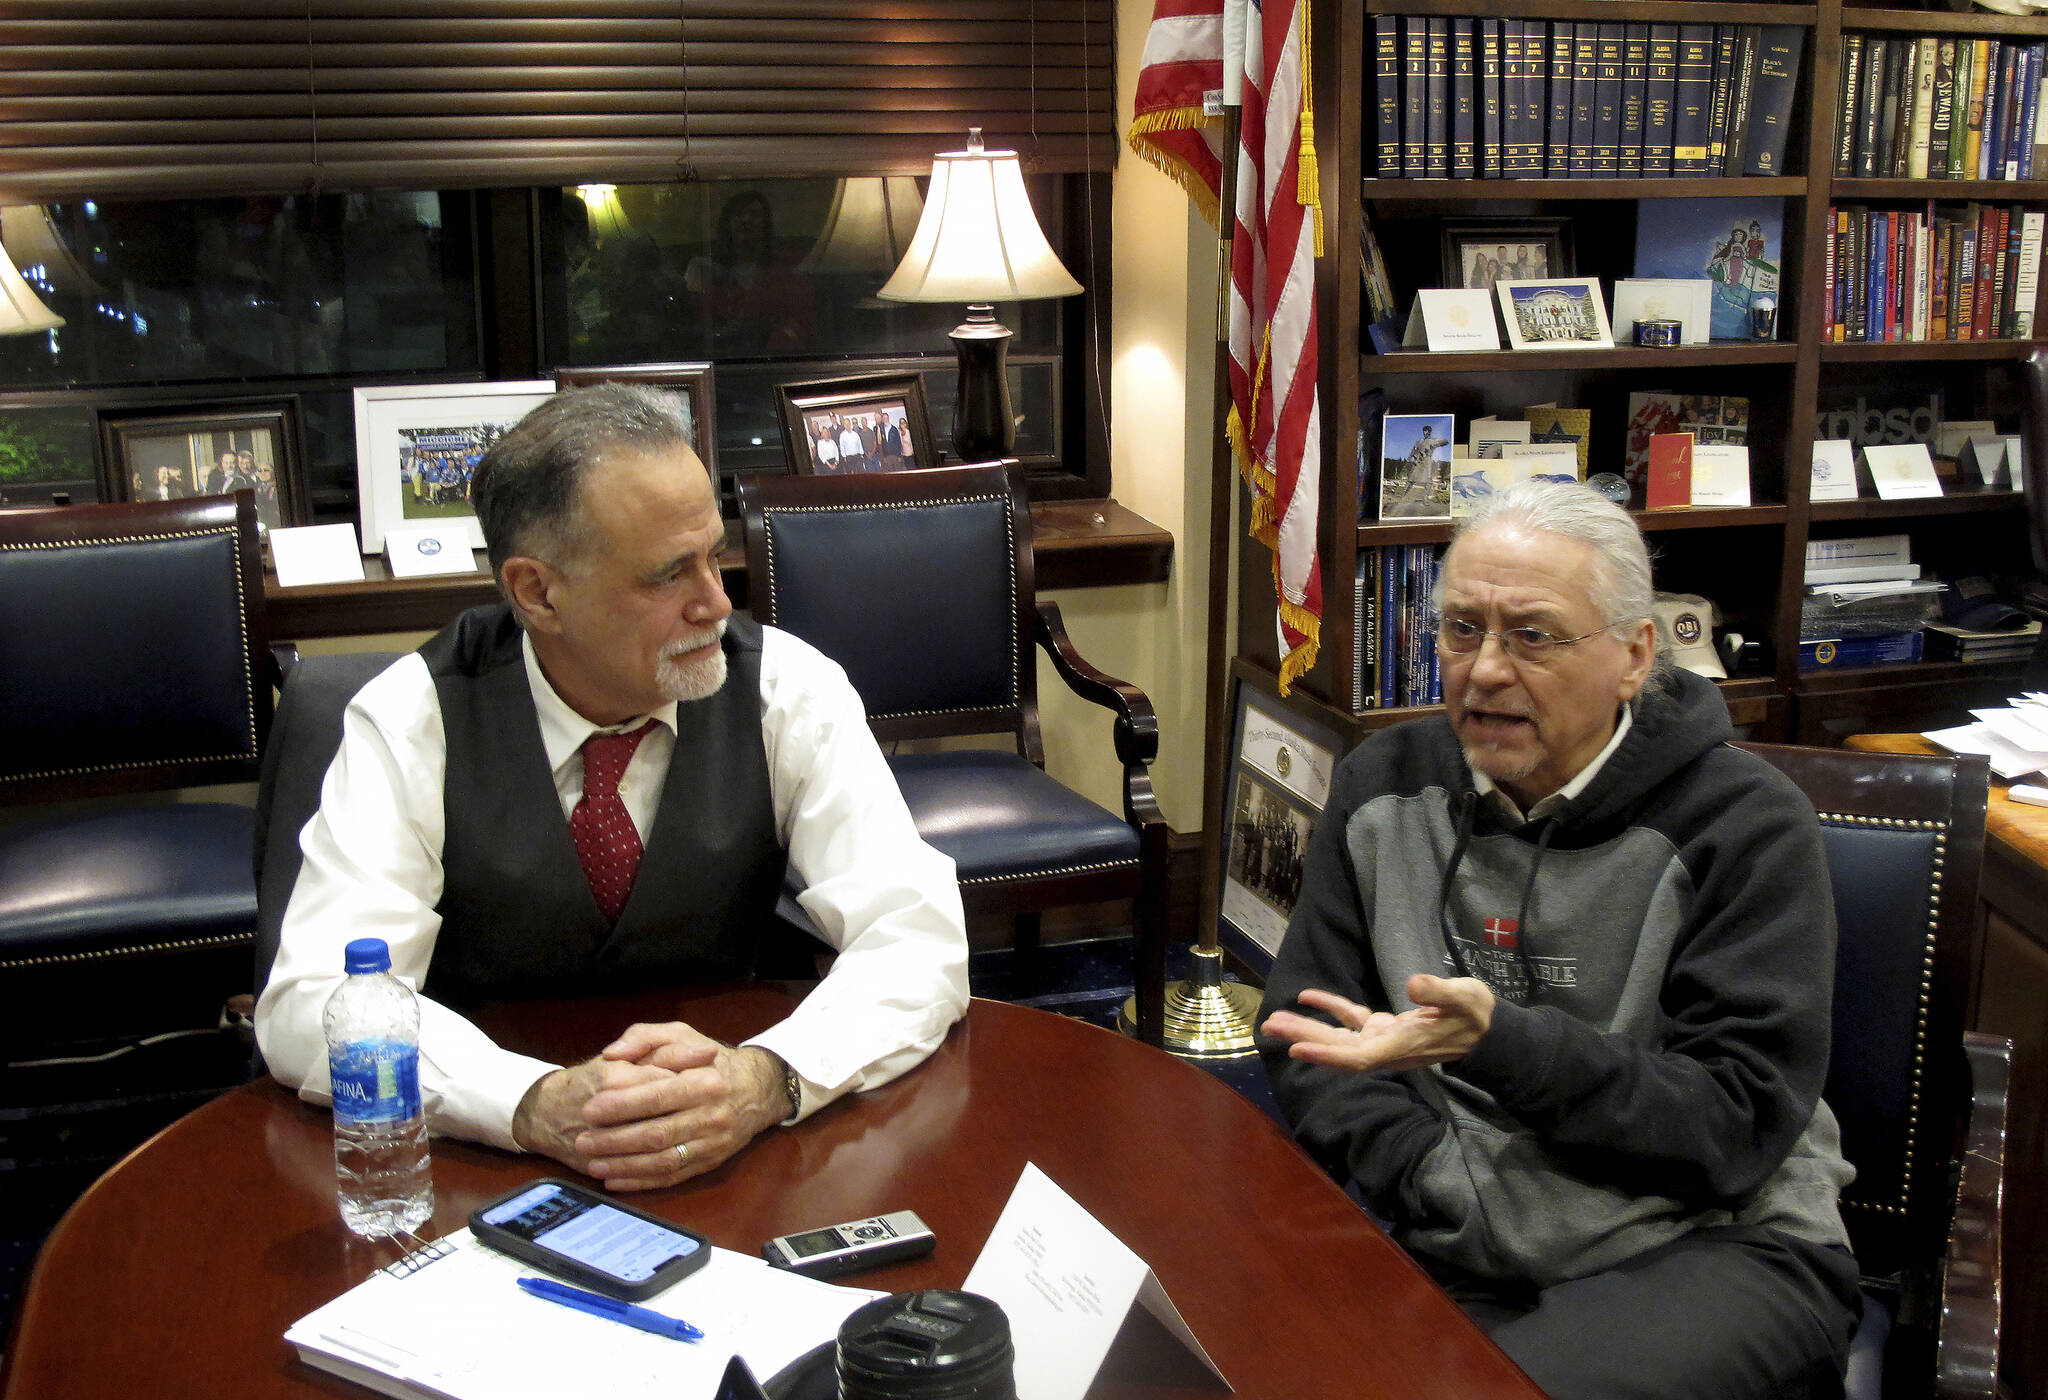 Alaska Senate President Peter Micciche, left, and Senate Minority Leader Tom Begich, right, meet with reporters in Micciche’s office in the early morning hours of Thursday, May 19, 2022, in Juneau, Alaska, after the Legislature ended its regular session. Micciche, a Republican, said last month that he is not seeking reelection this year and Begich, a Democrat, announced Thursday, June, 2, 2022 that he is likely to withdraw his candidacy next week. (AP Photo/Becky Bohrer, File)